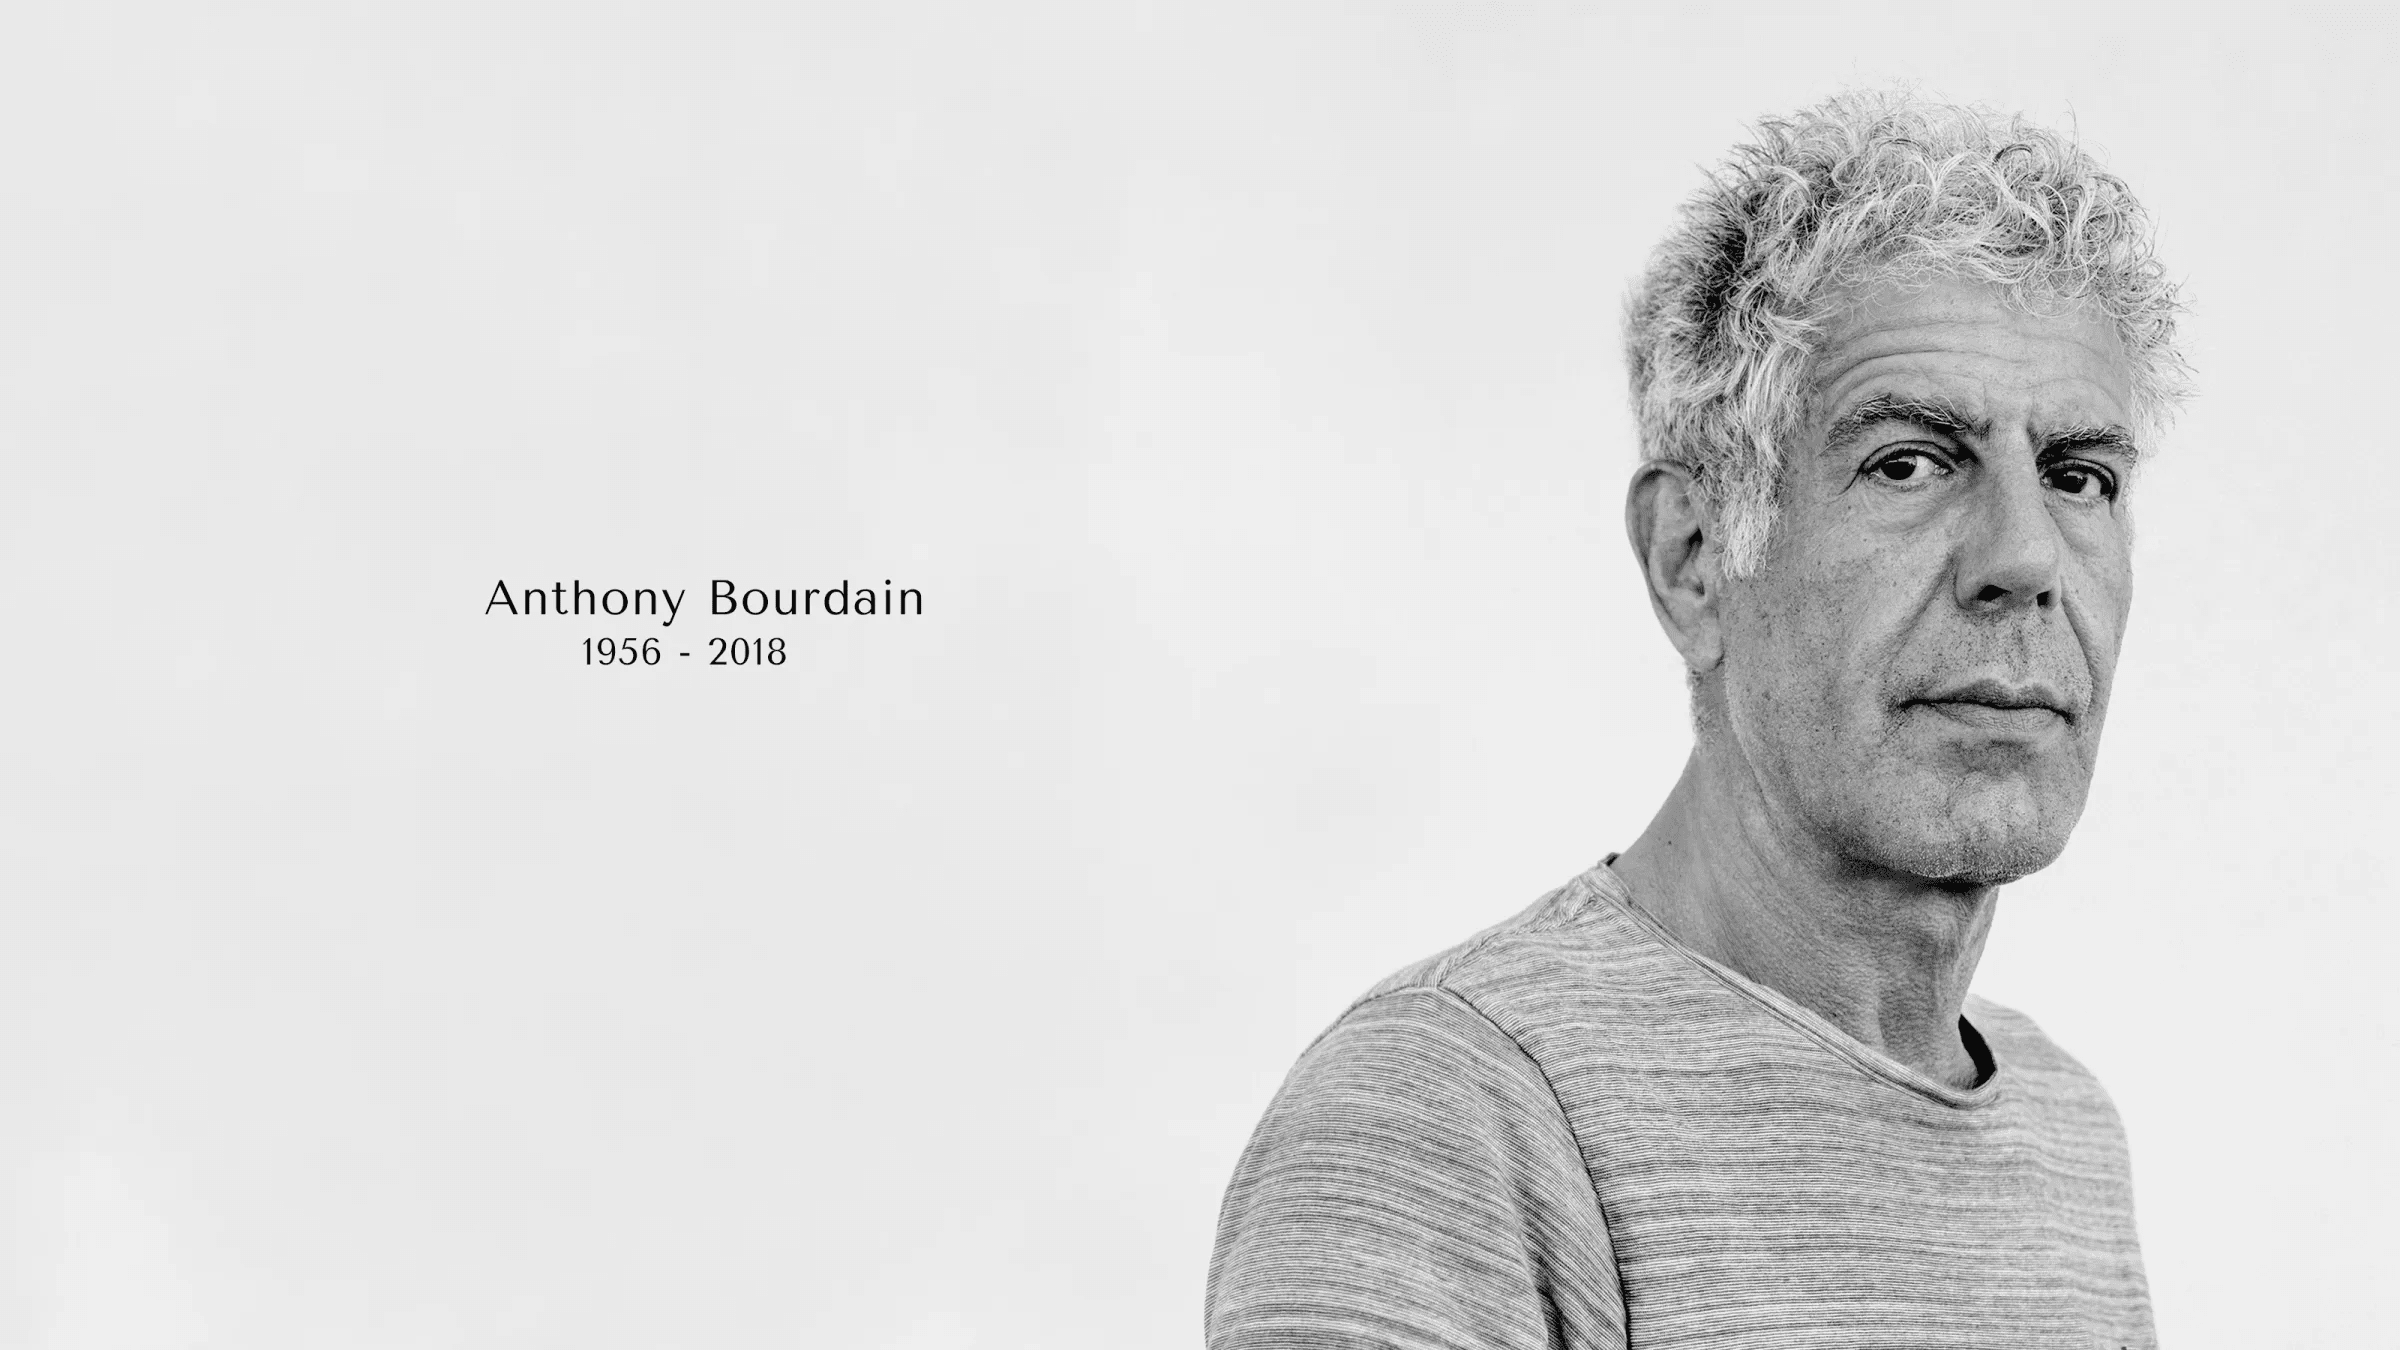 photo of white man with gray hair, on the right words "Anthony Bourdain 1956 - 2018"